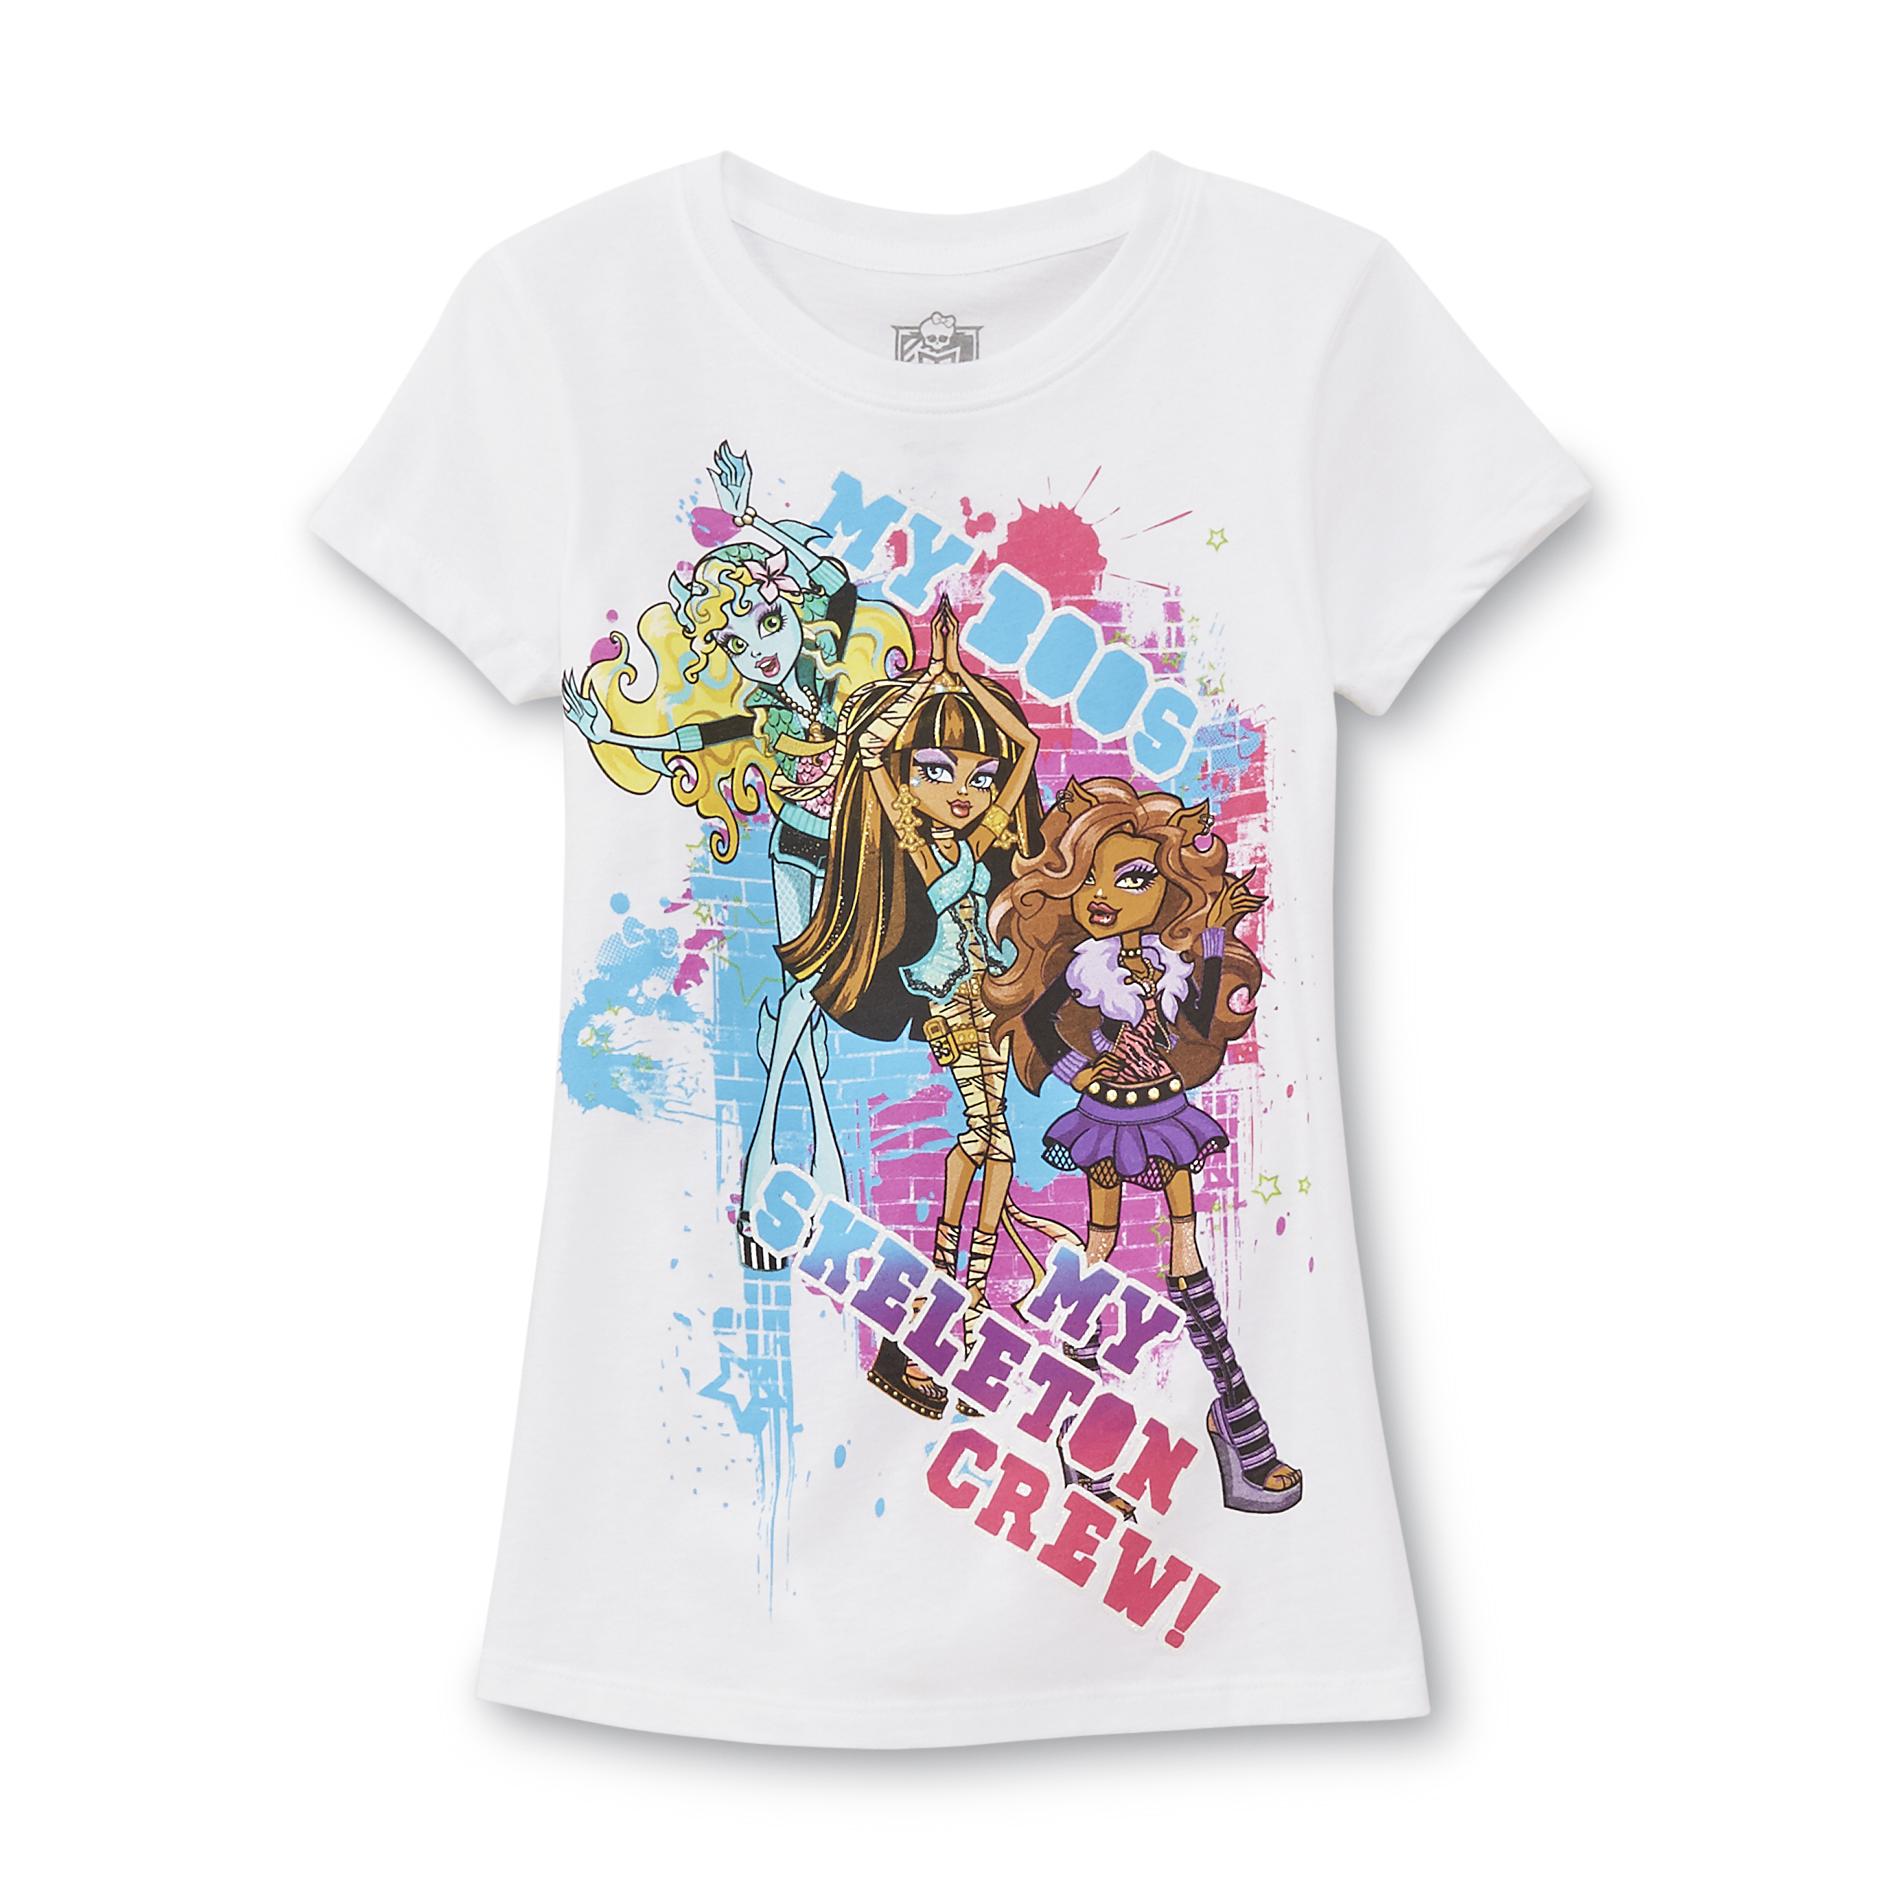 Monster High Girl's Graphic Top